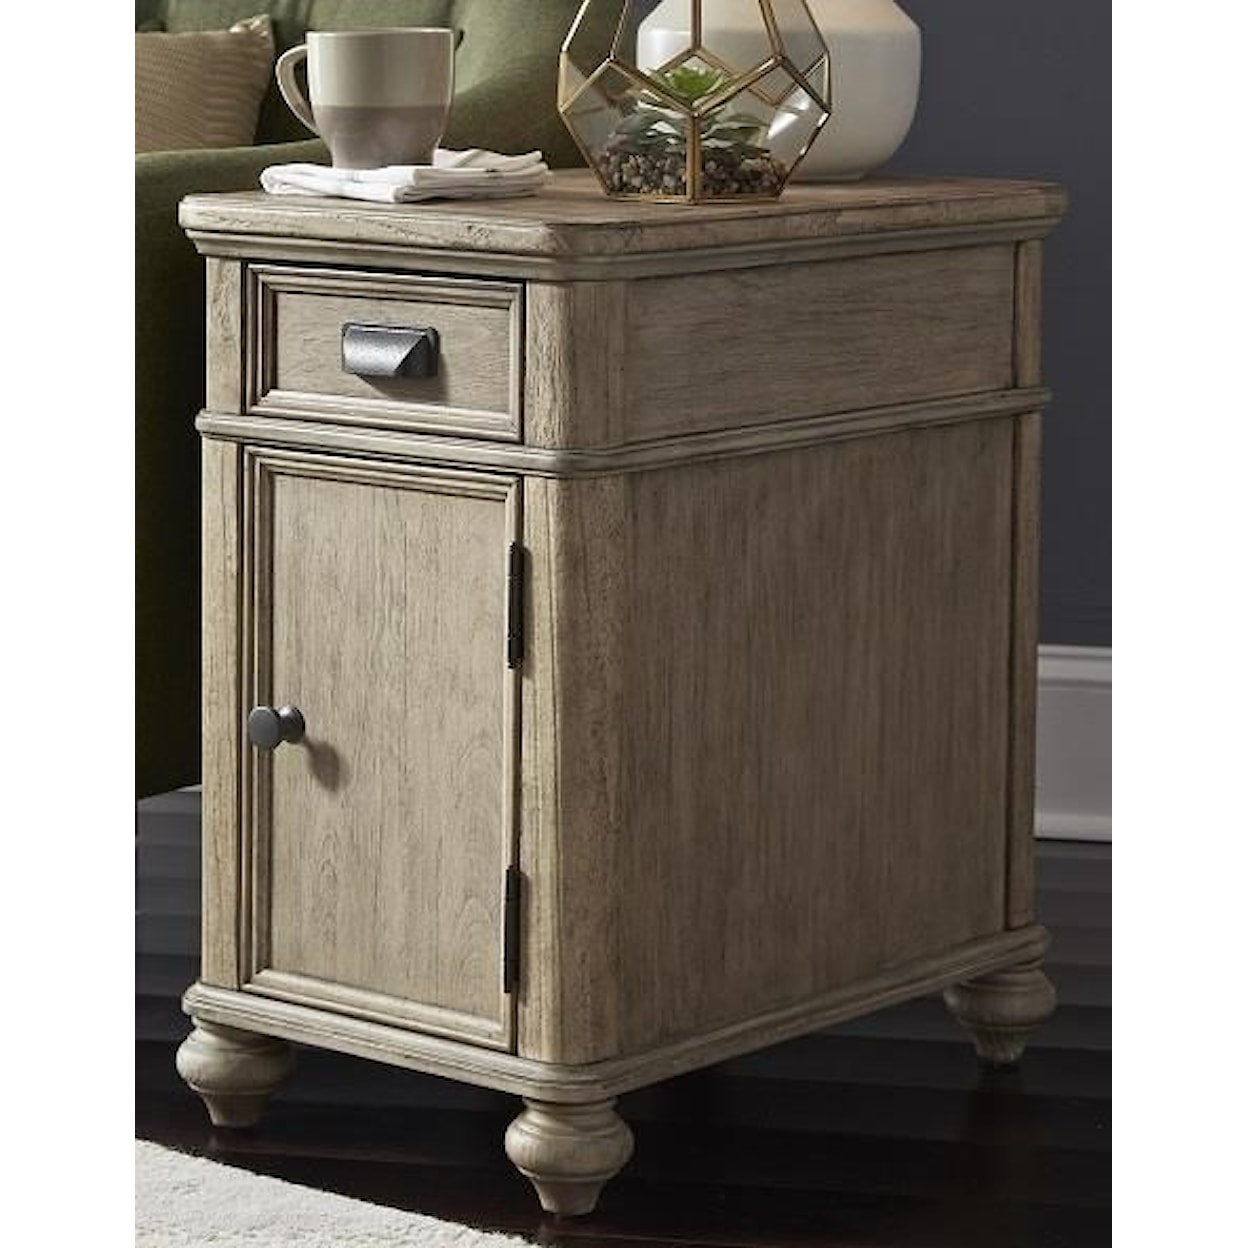 Null Furniture 8817 Chairside Cabinet